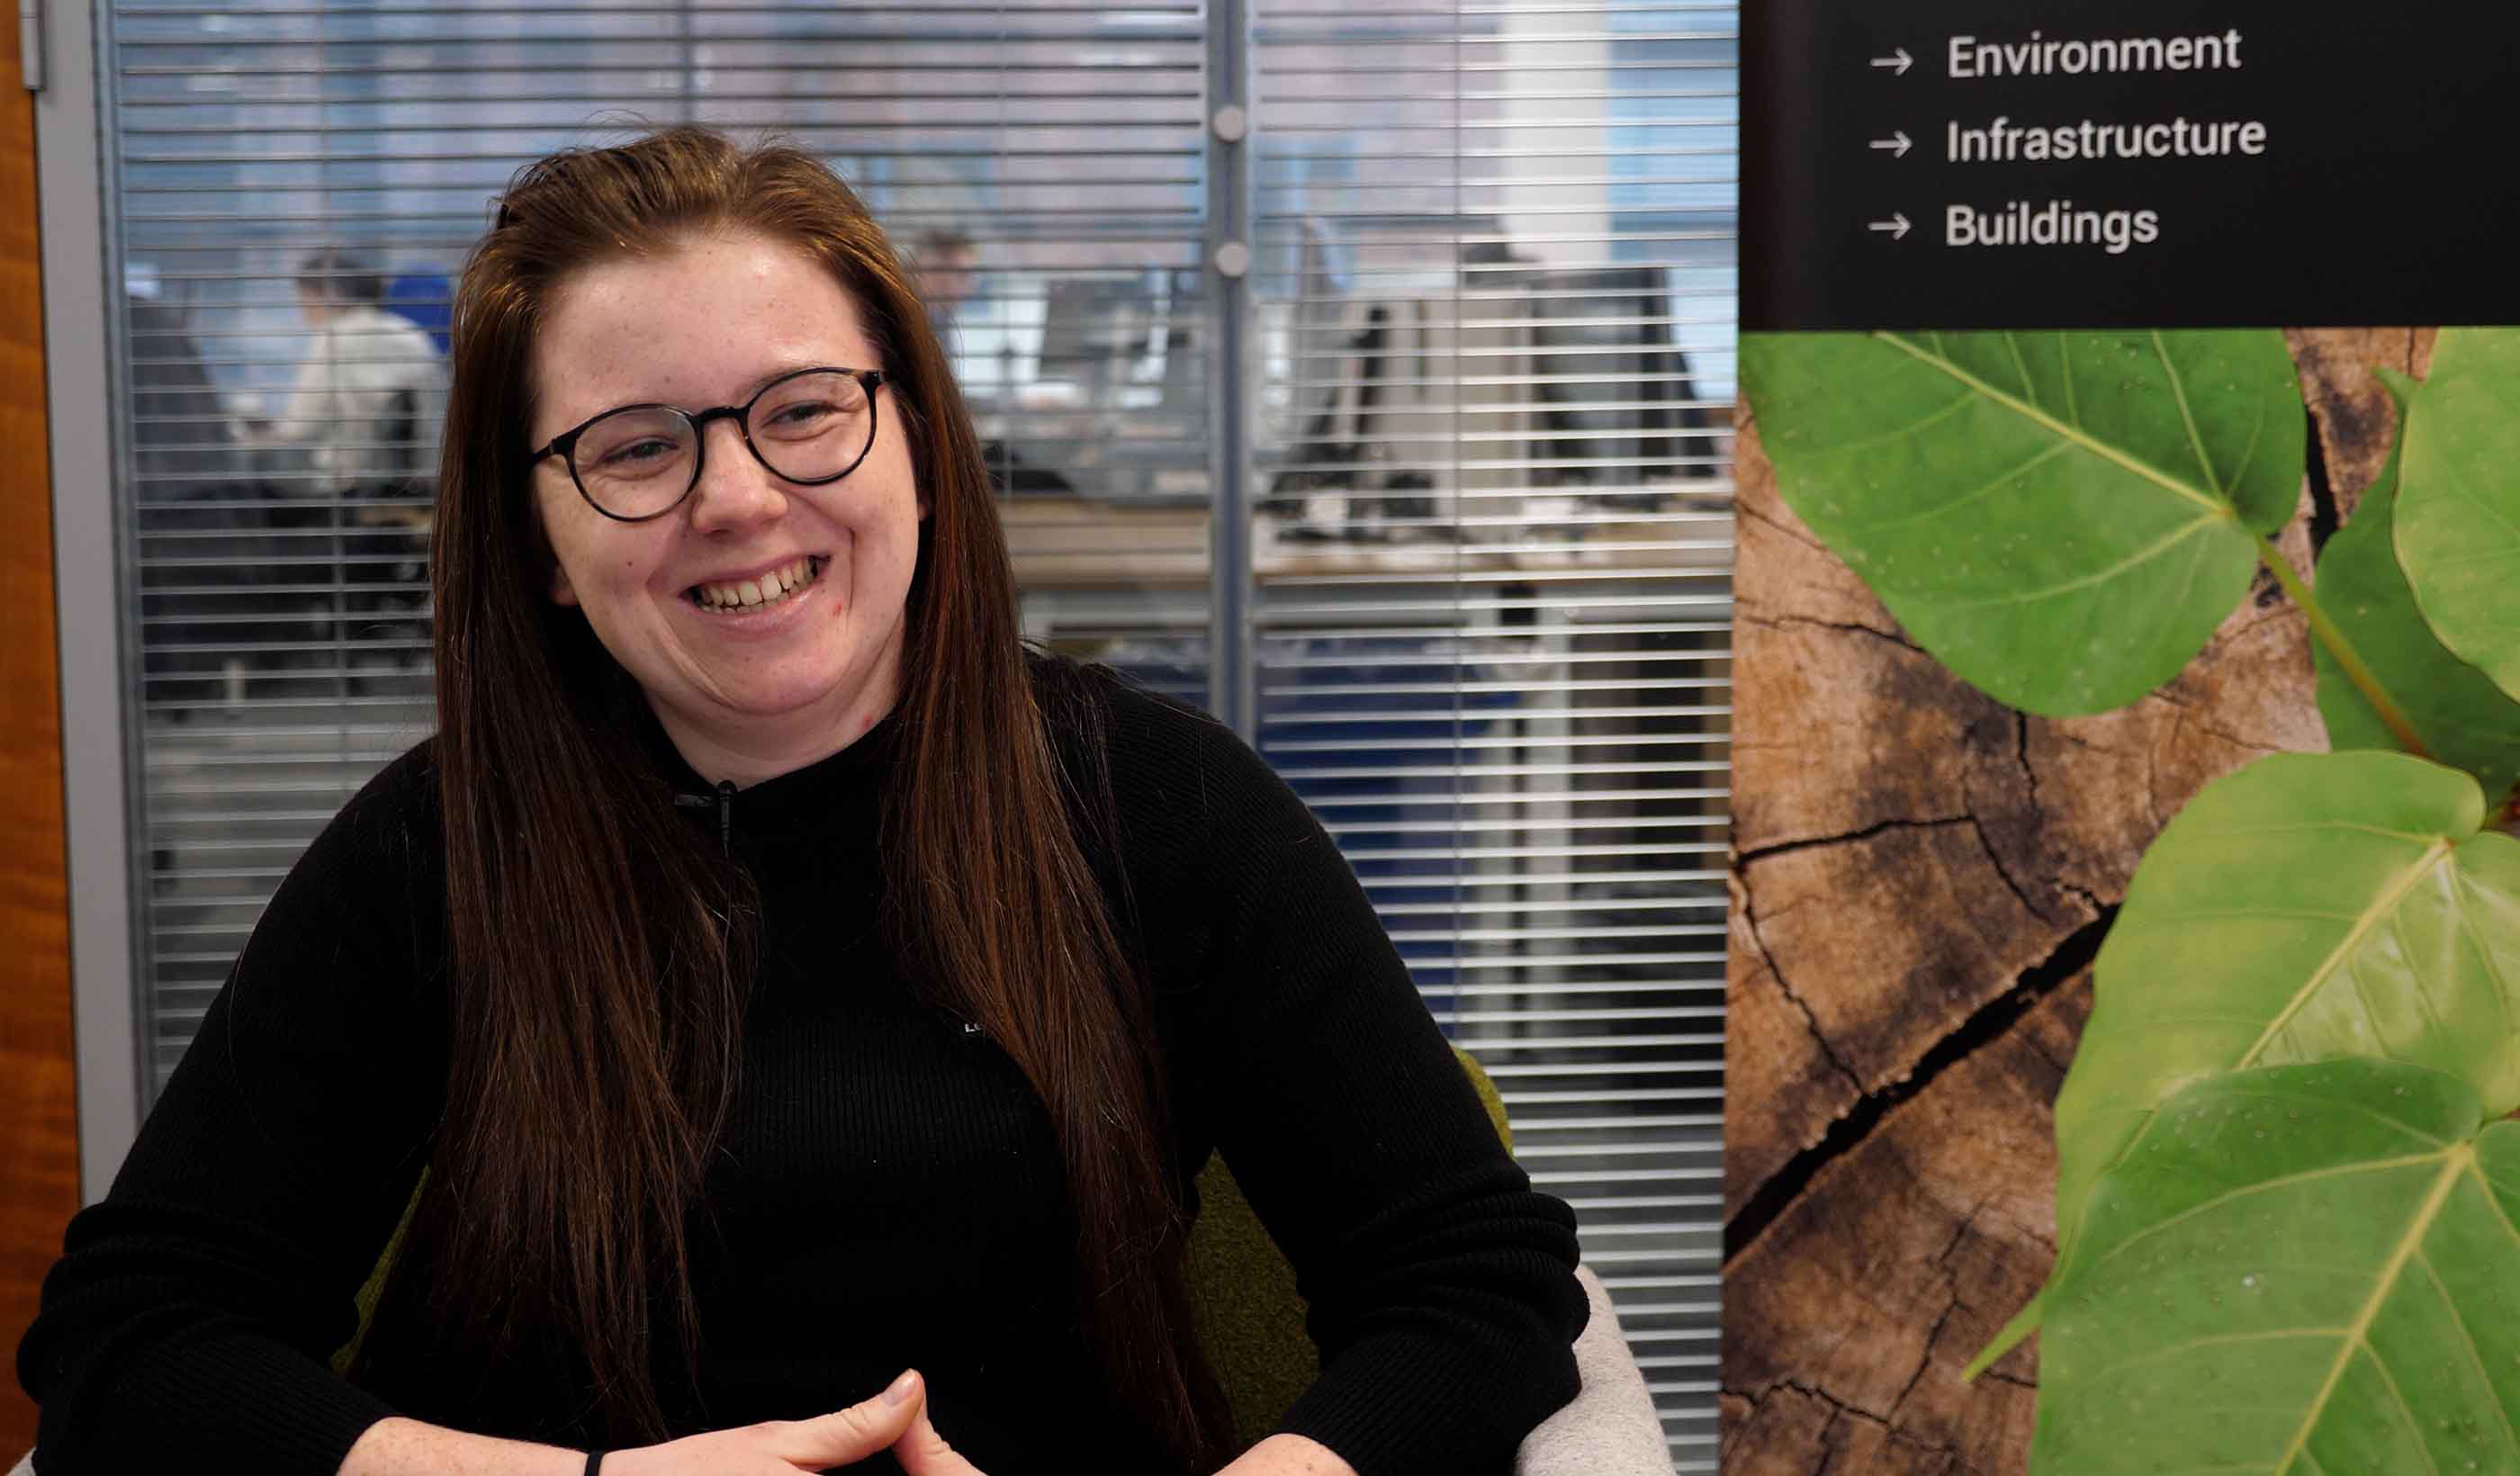 My Stantec Story: India Hutchinson